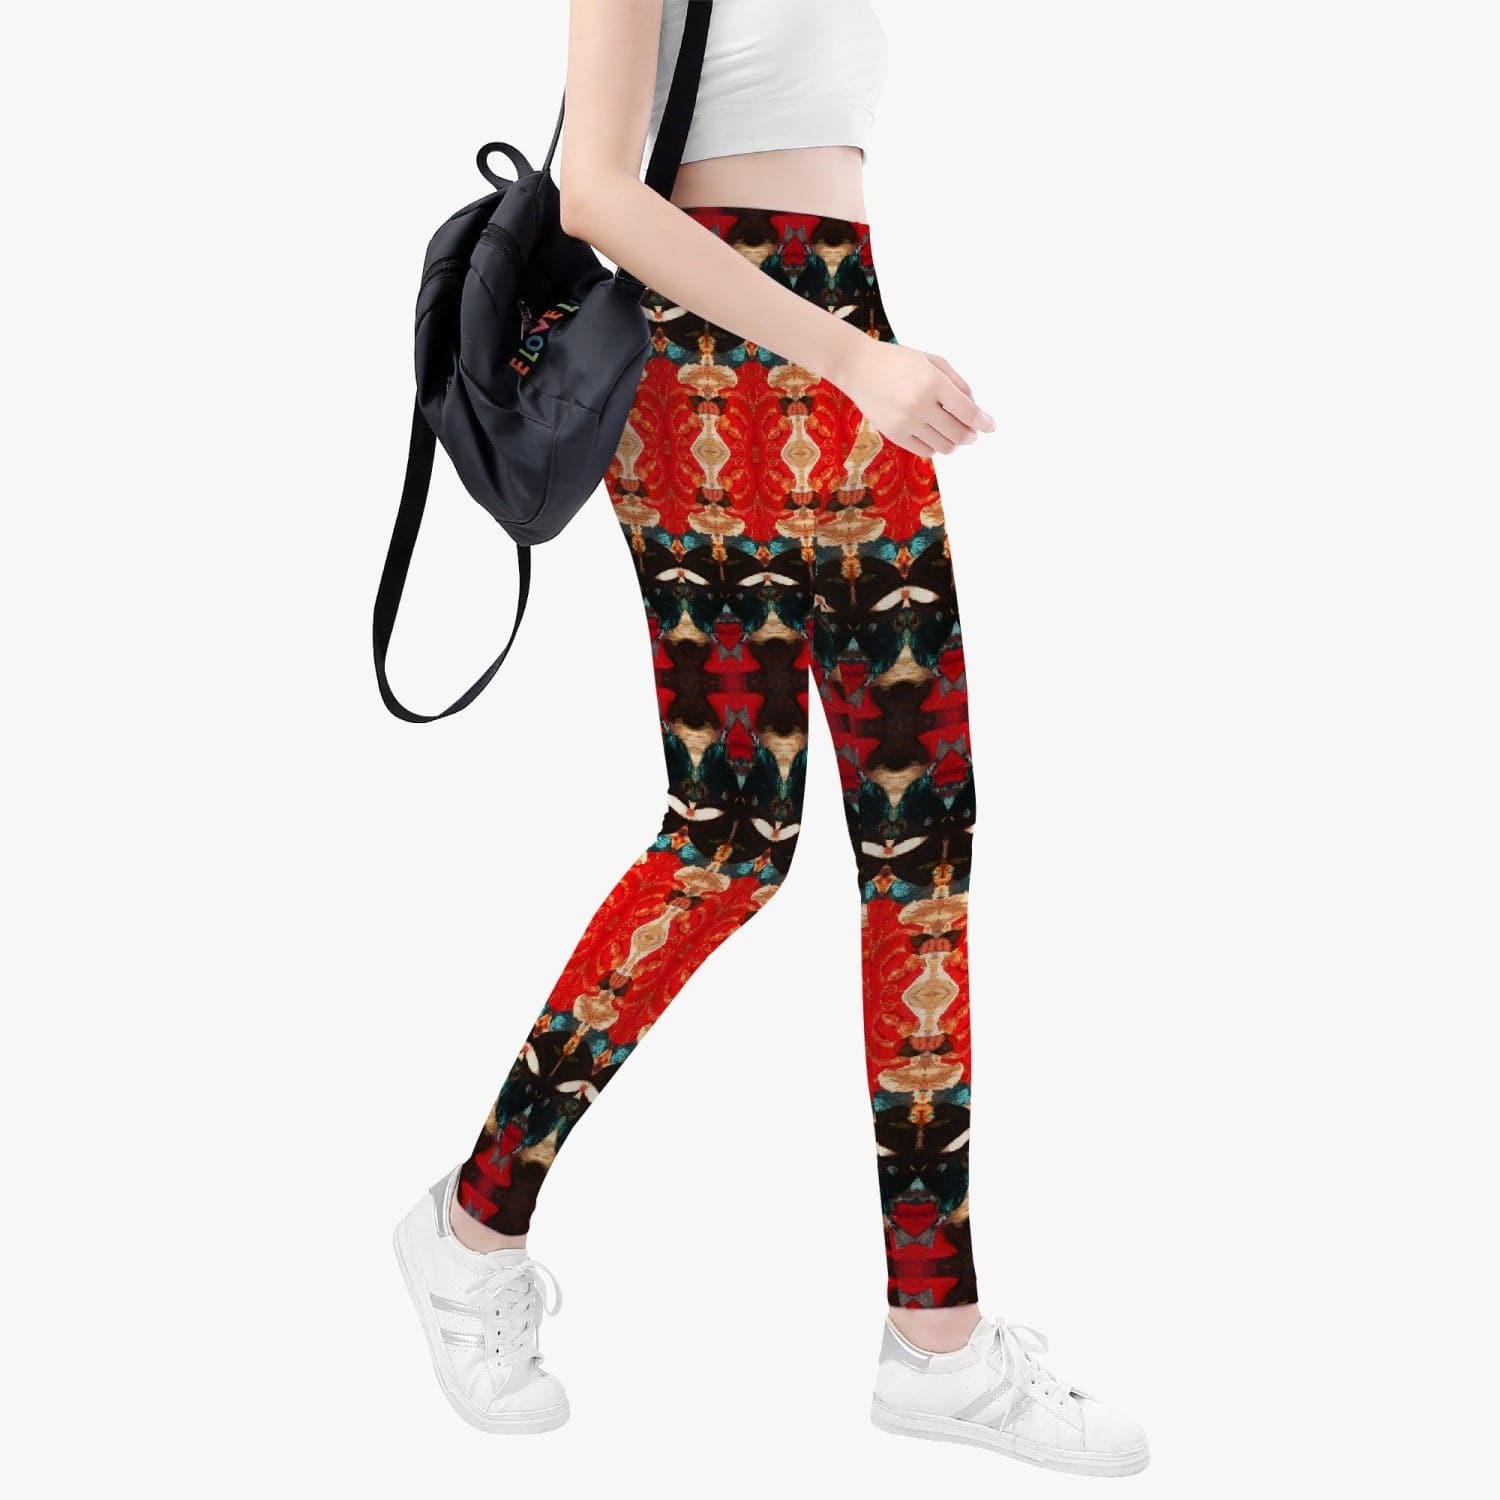 Red Orange and Black Hymalaian Patterned Yoga Pants for Women